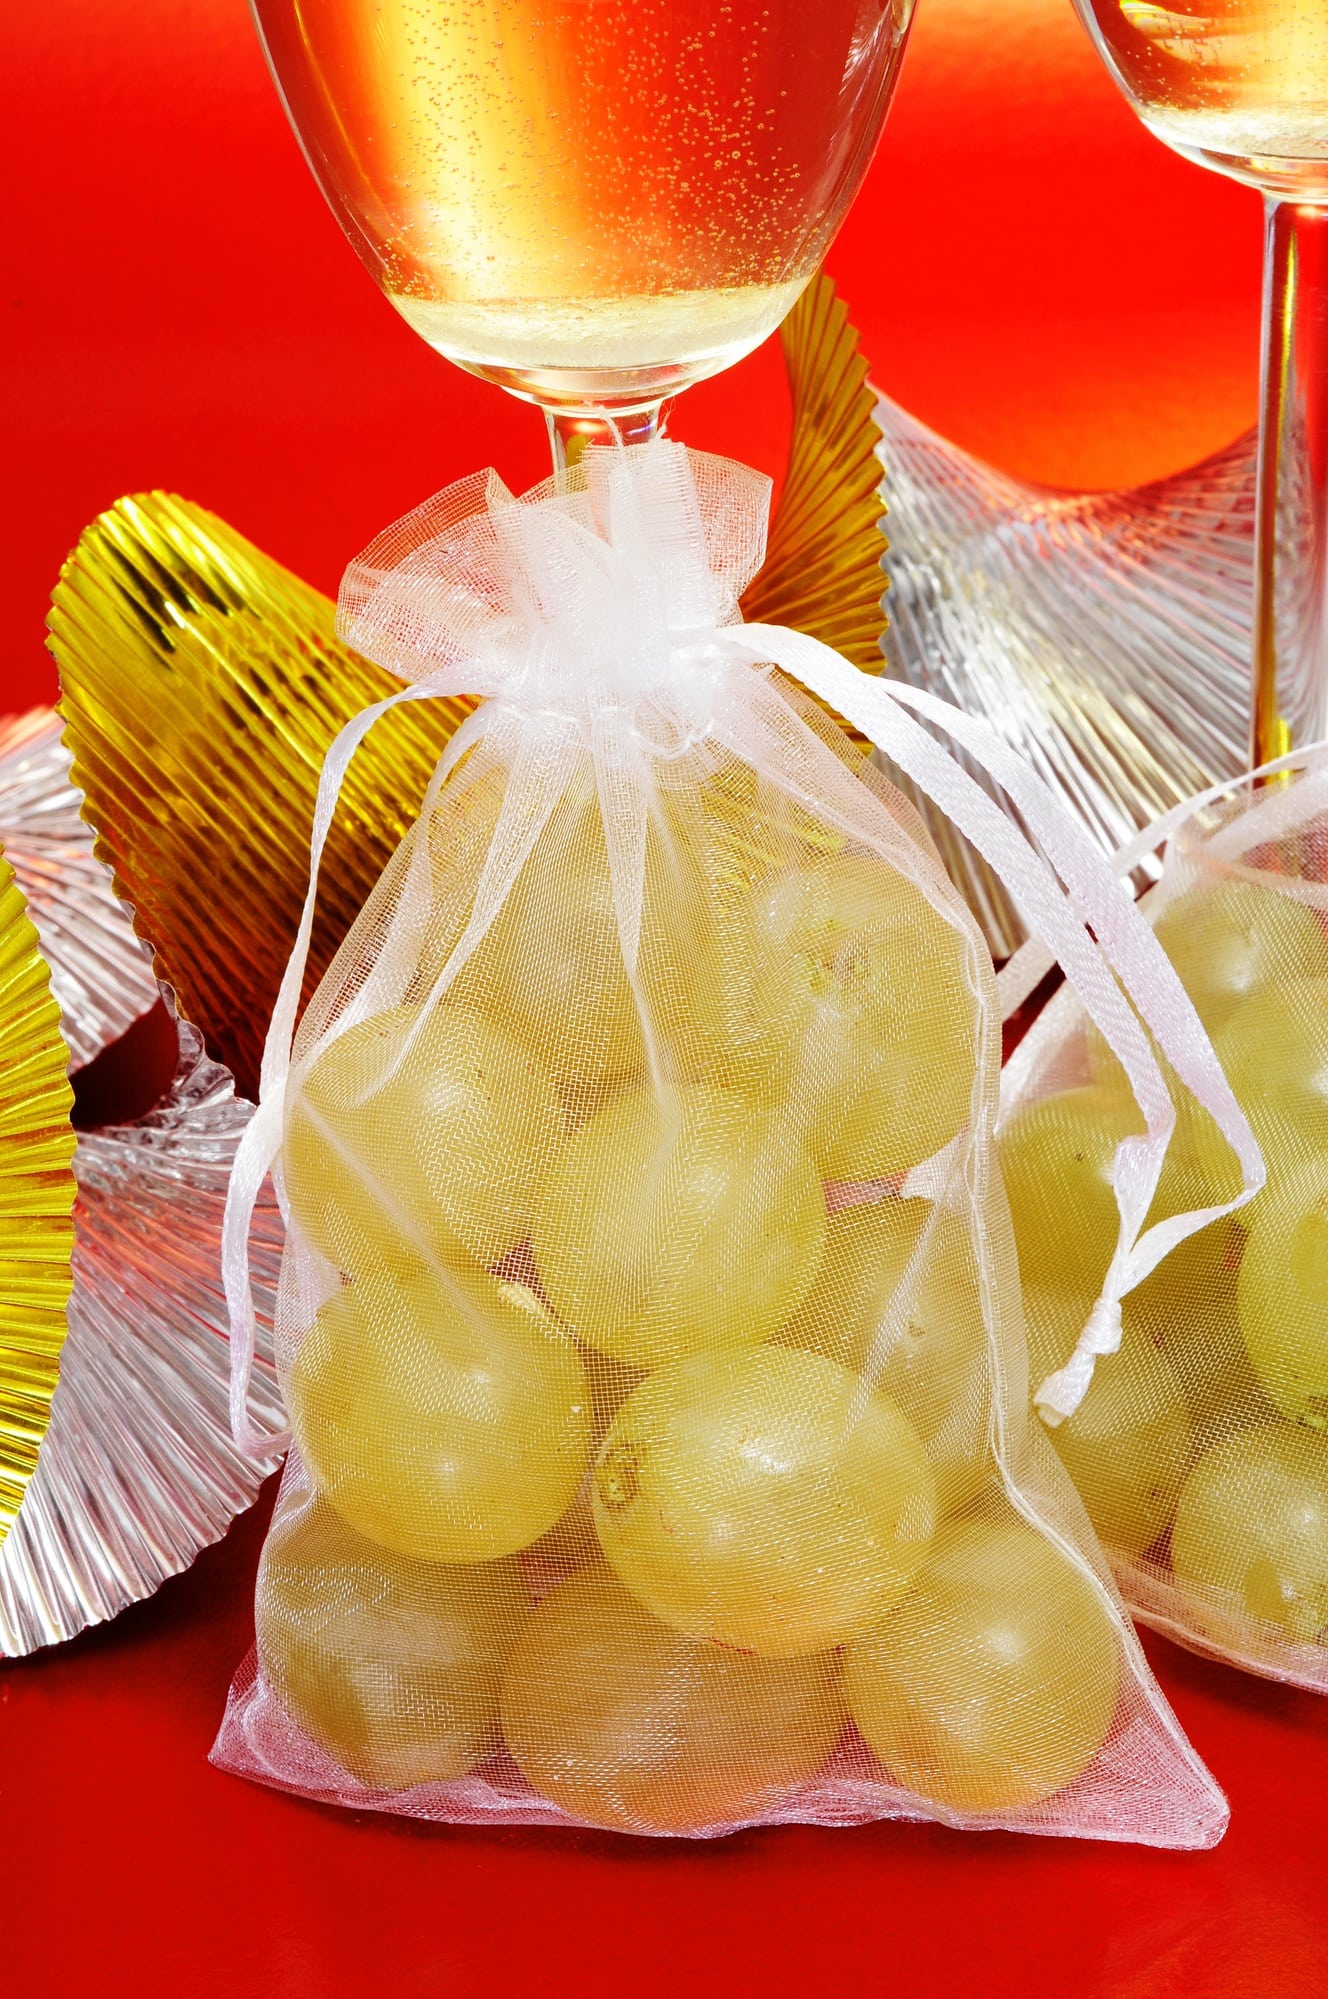 12 Grapes on New Year's Eve